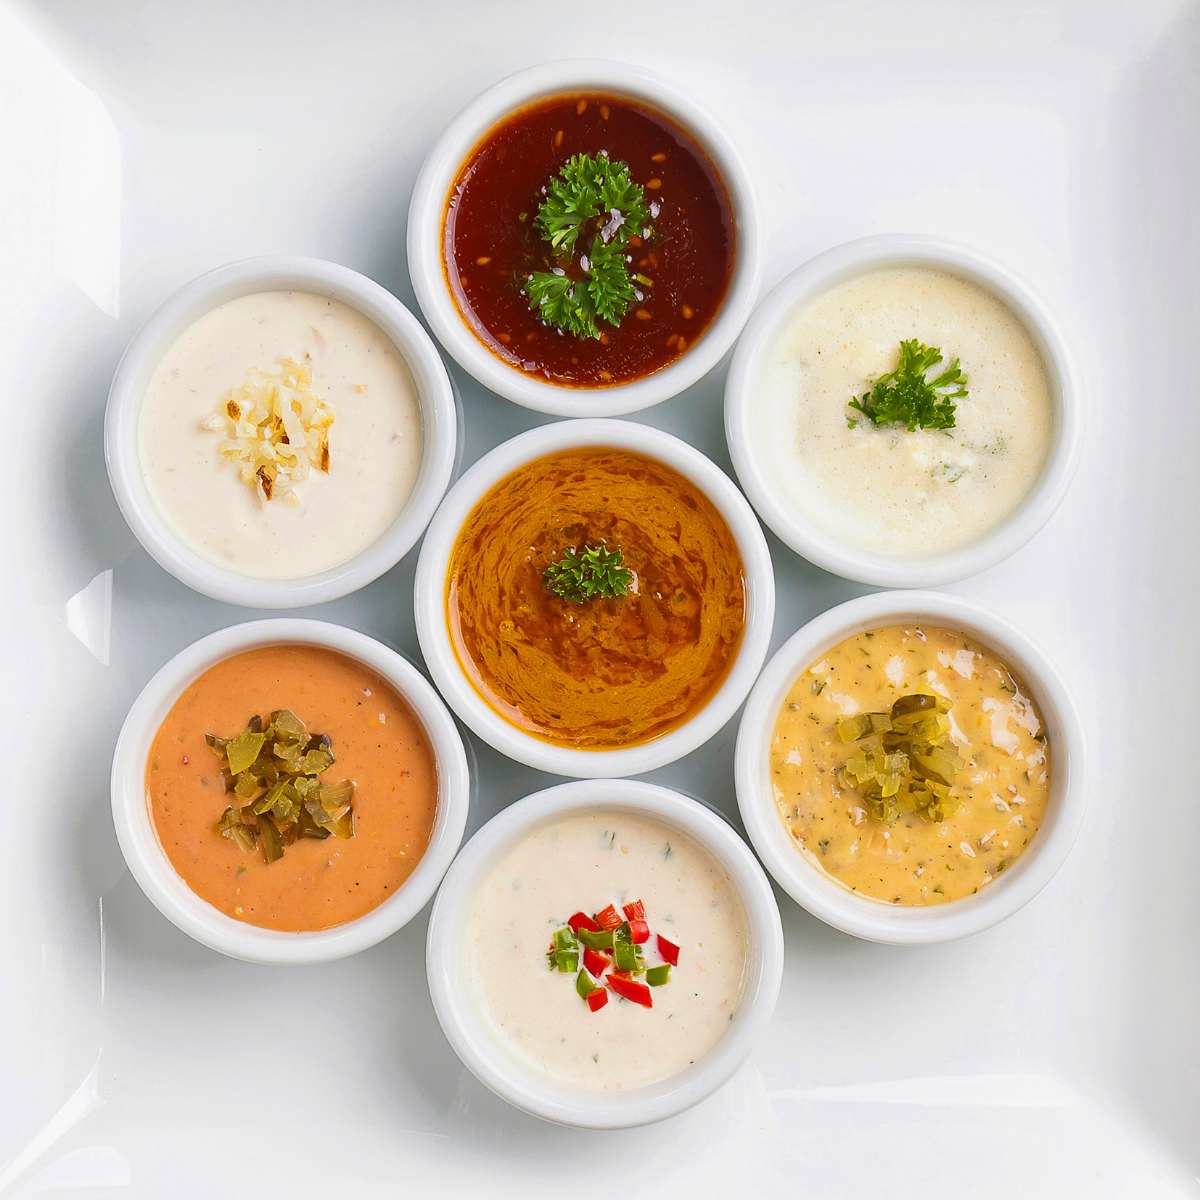 Variety of Sauces in a Plate